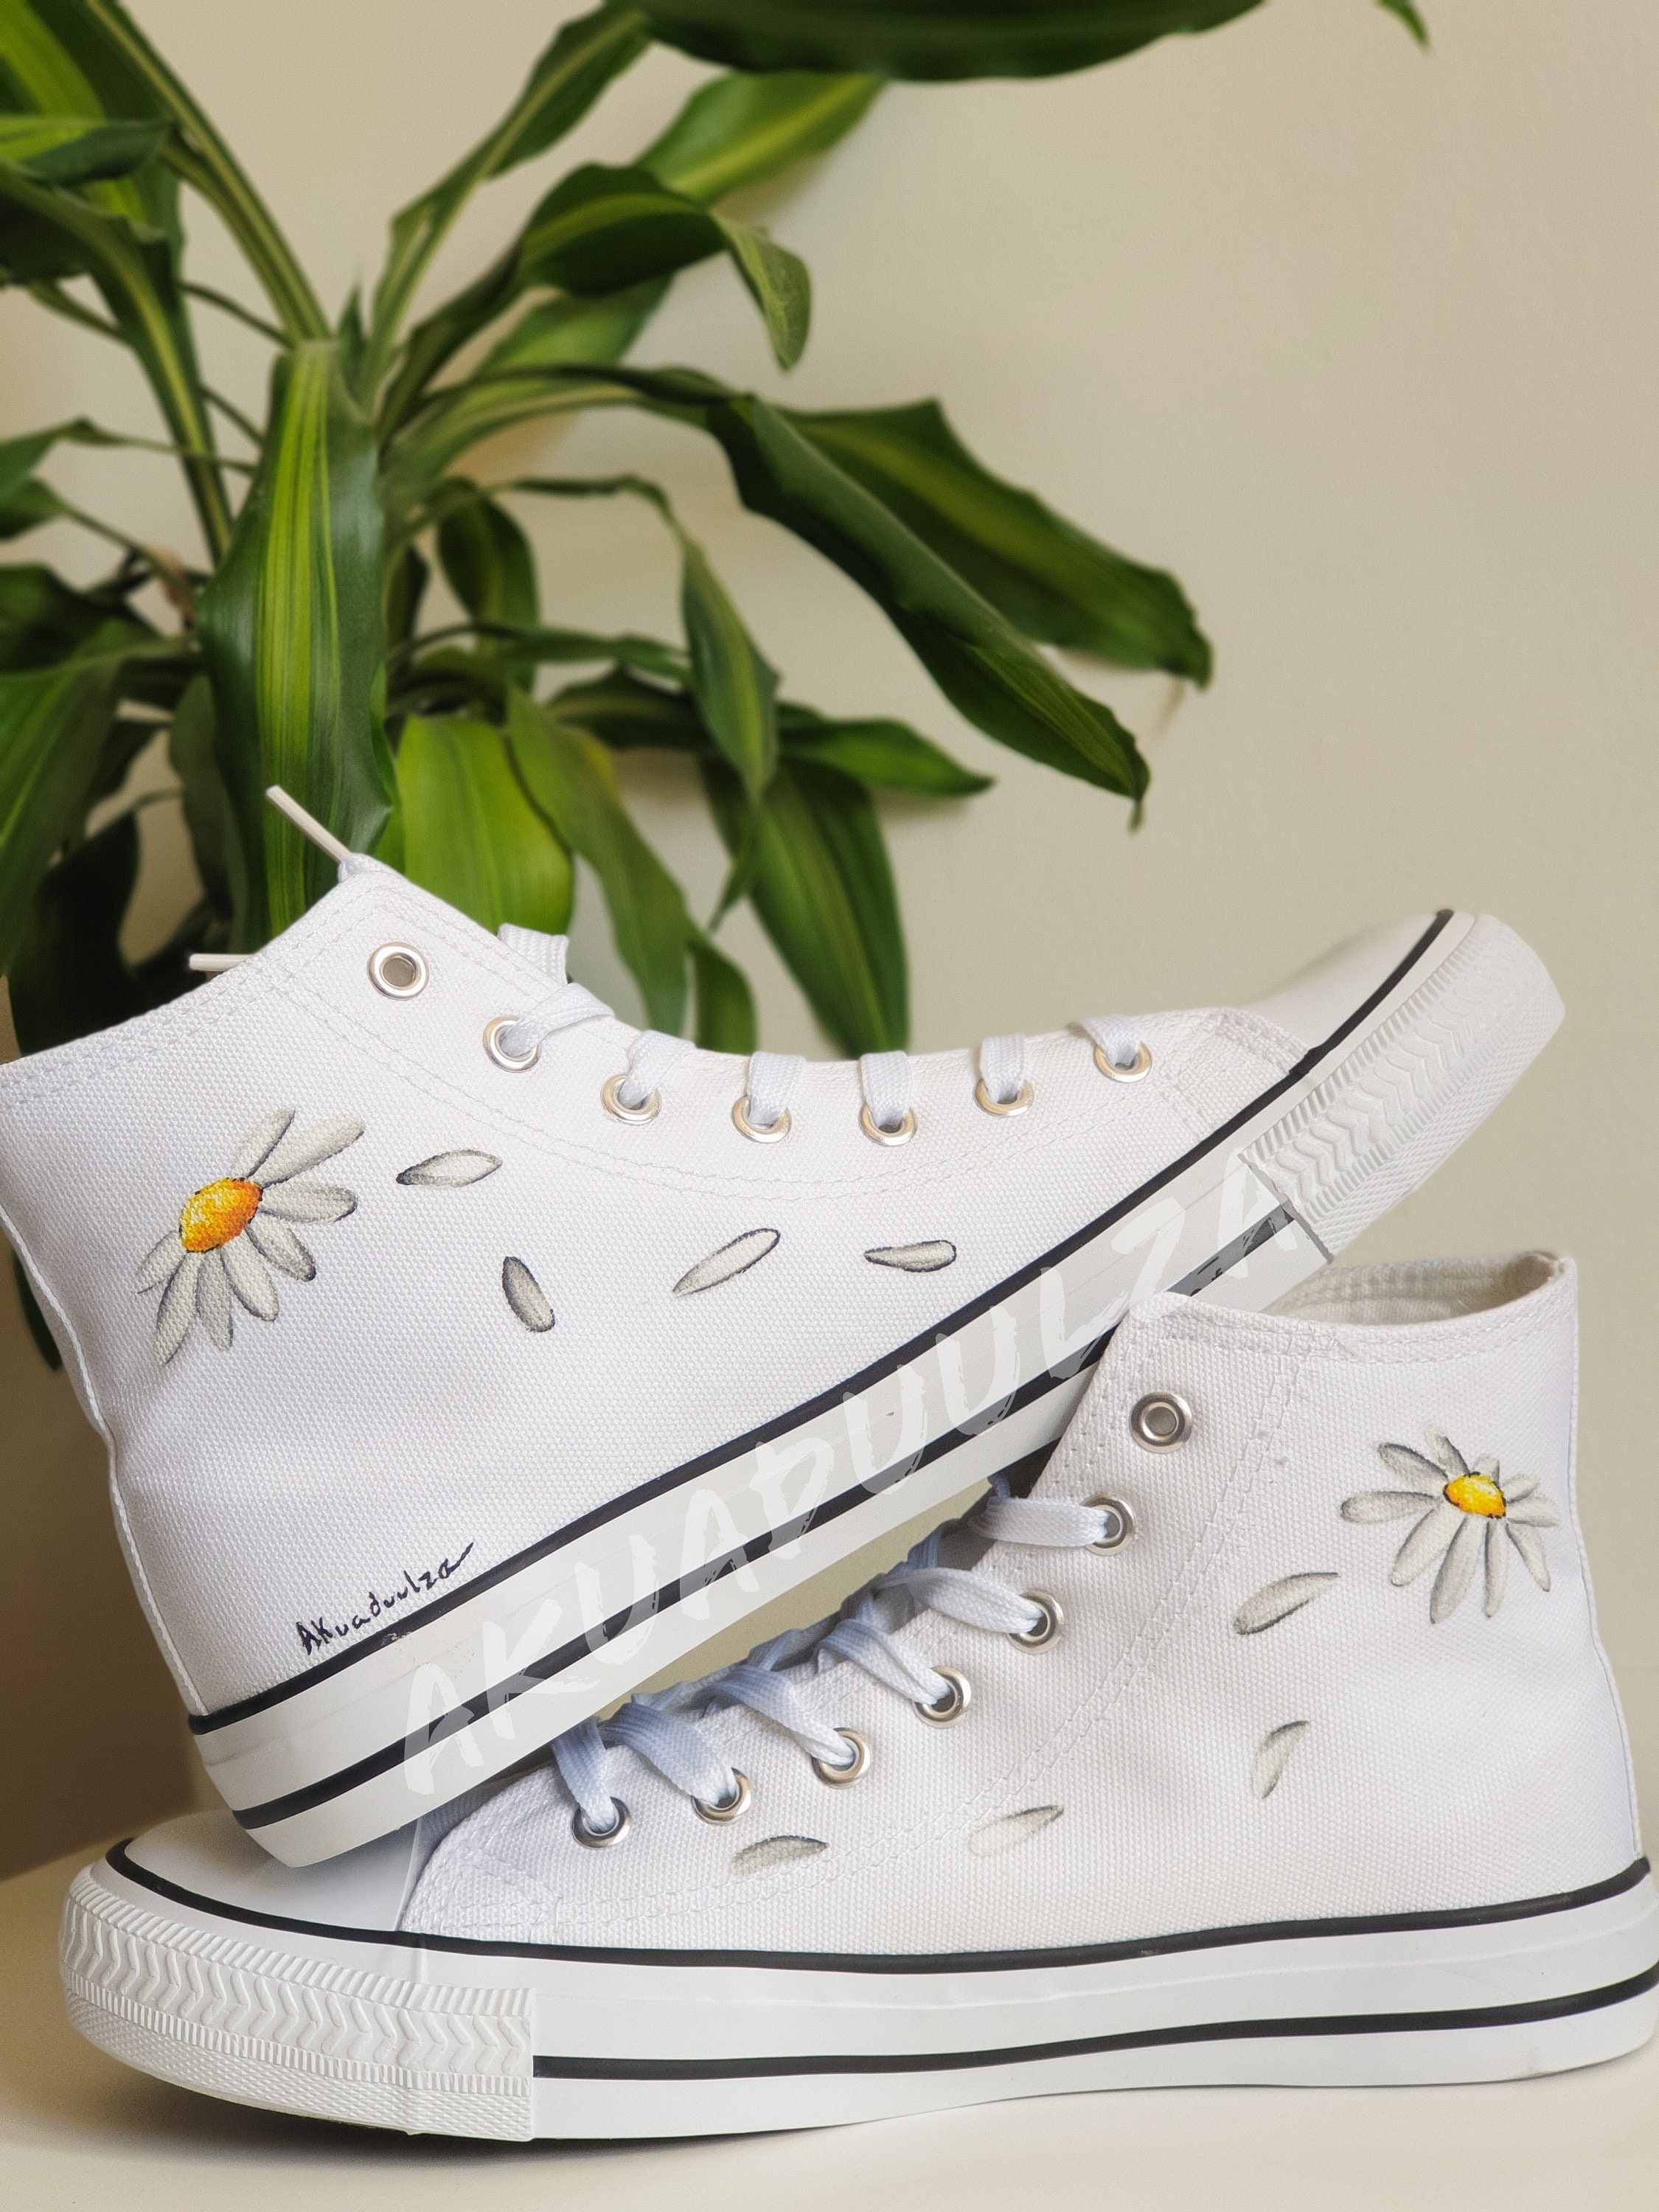 Summer Daisy Hand Painted Shoes / Wildflowers Personalised - Etsy